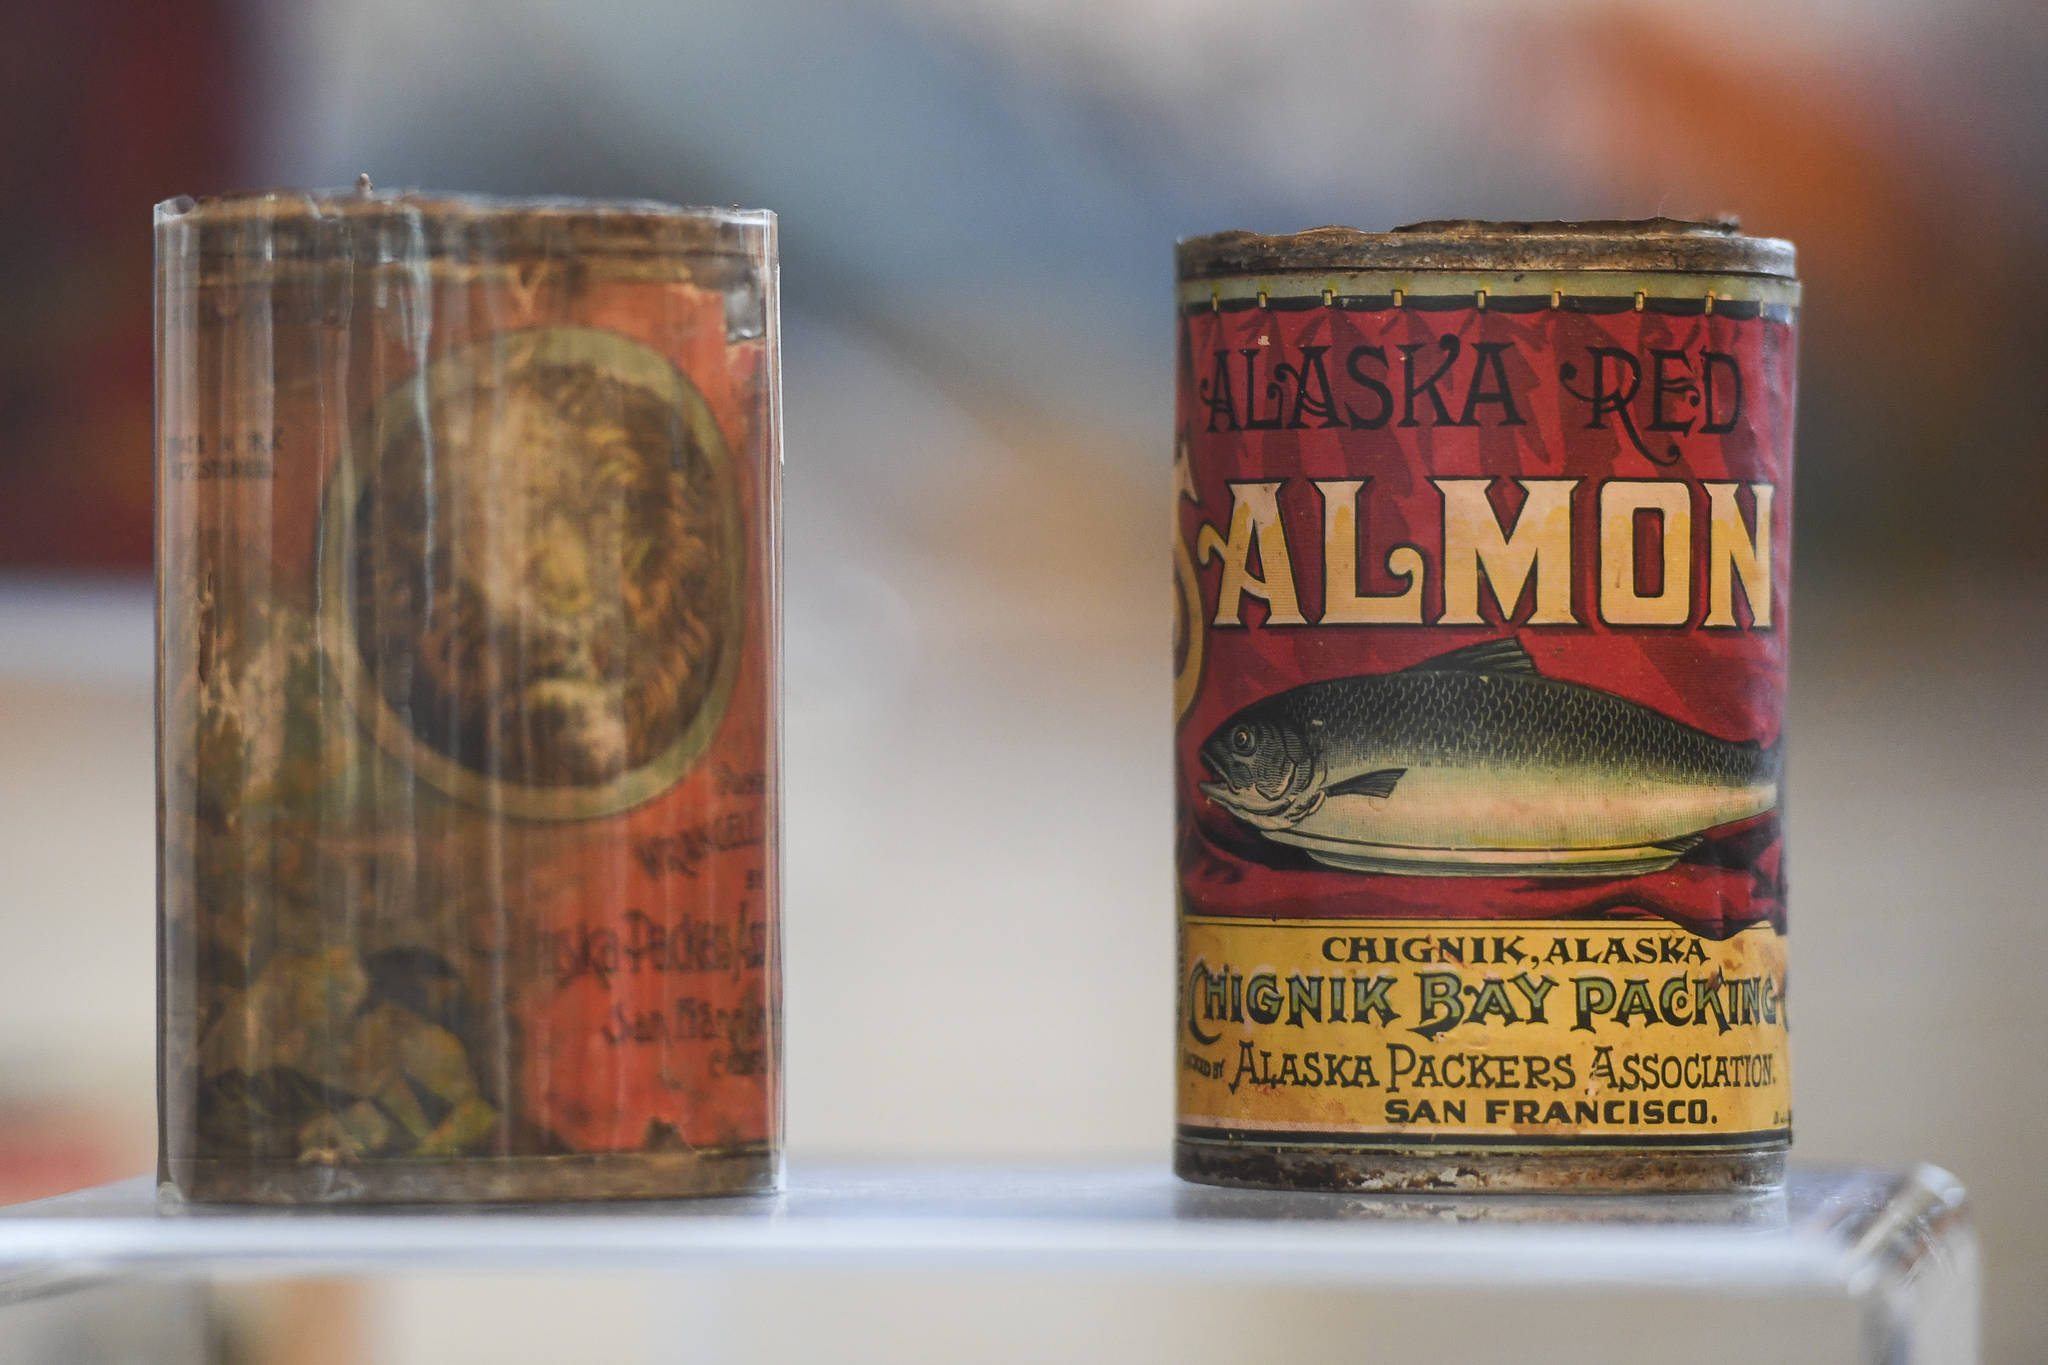 The Alaska State Library features historic salmon canneries with a collection from the Karen Hofstad at the Research Center for First Friday on Friday, June 7, 2019. (Michael Penn | Juneau Empire)